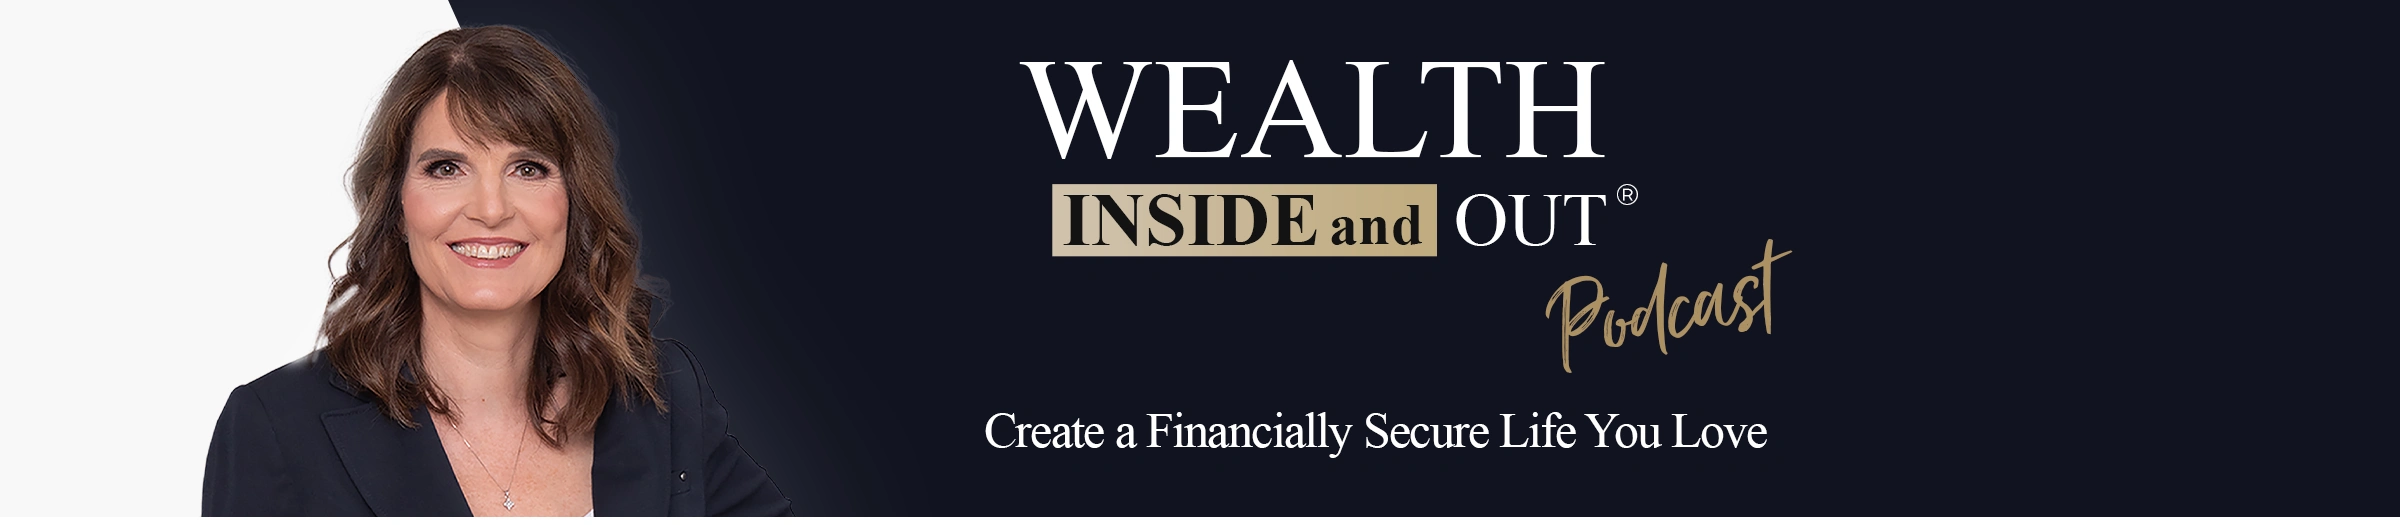 Wealth Inside and Out Podcast Hero Banner